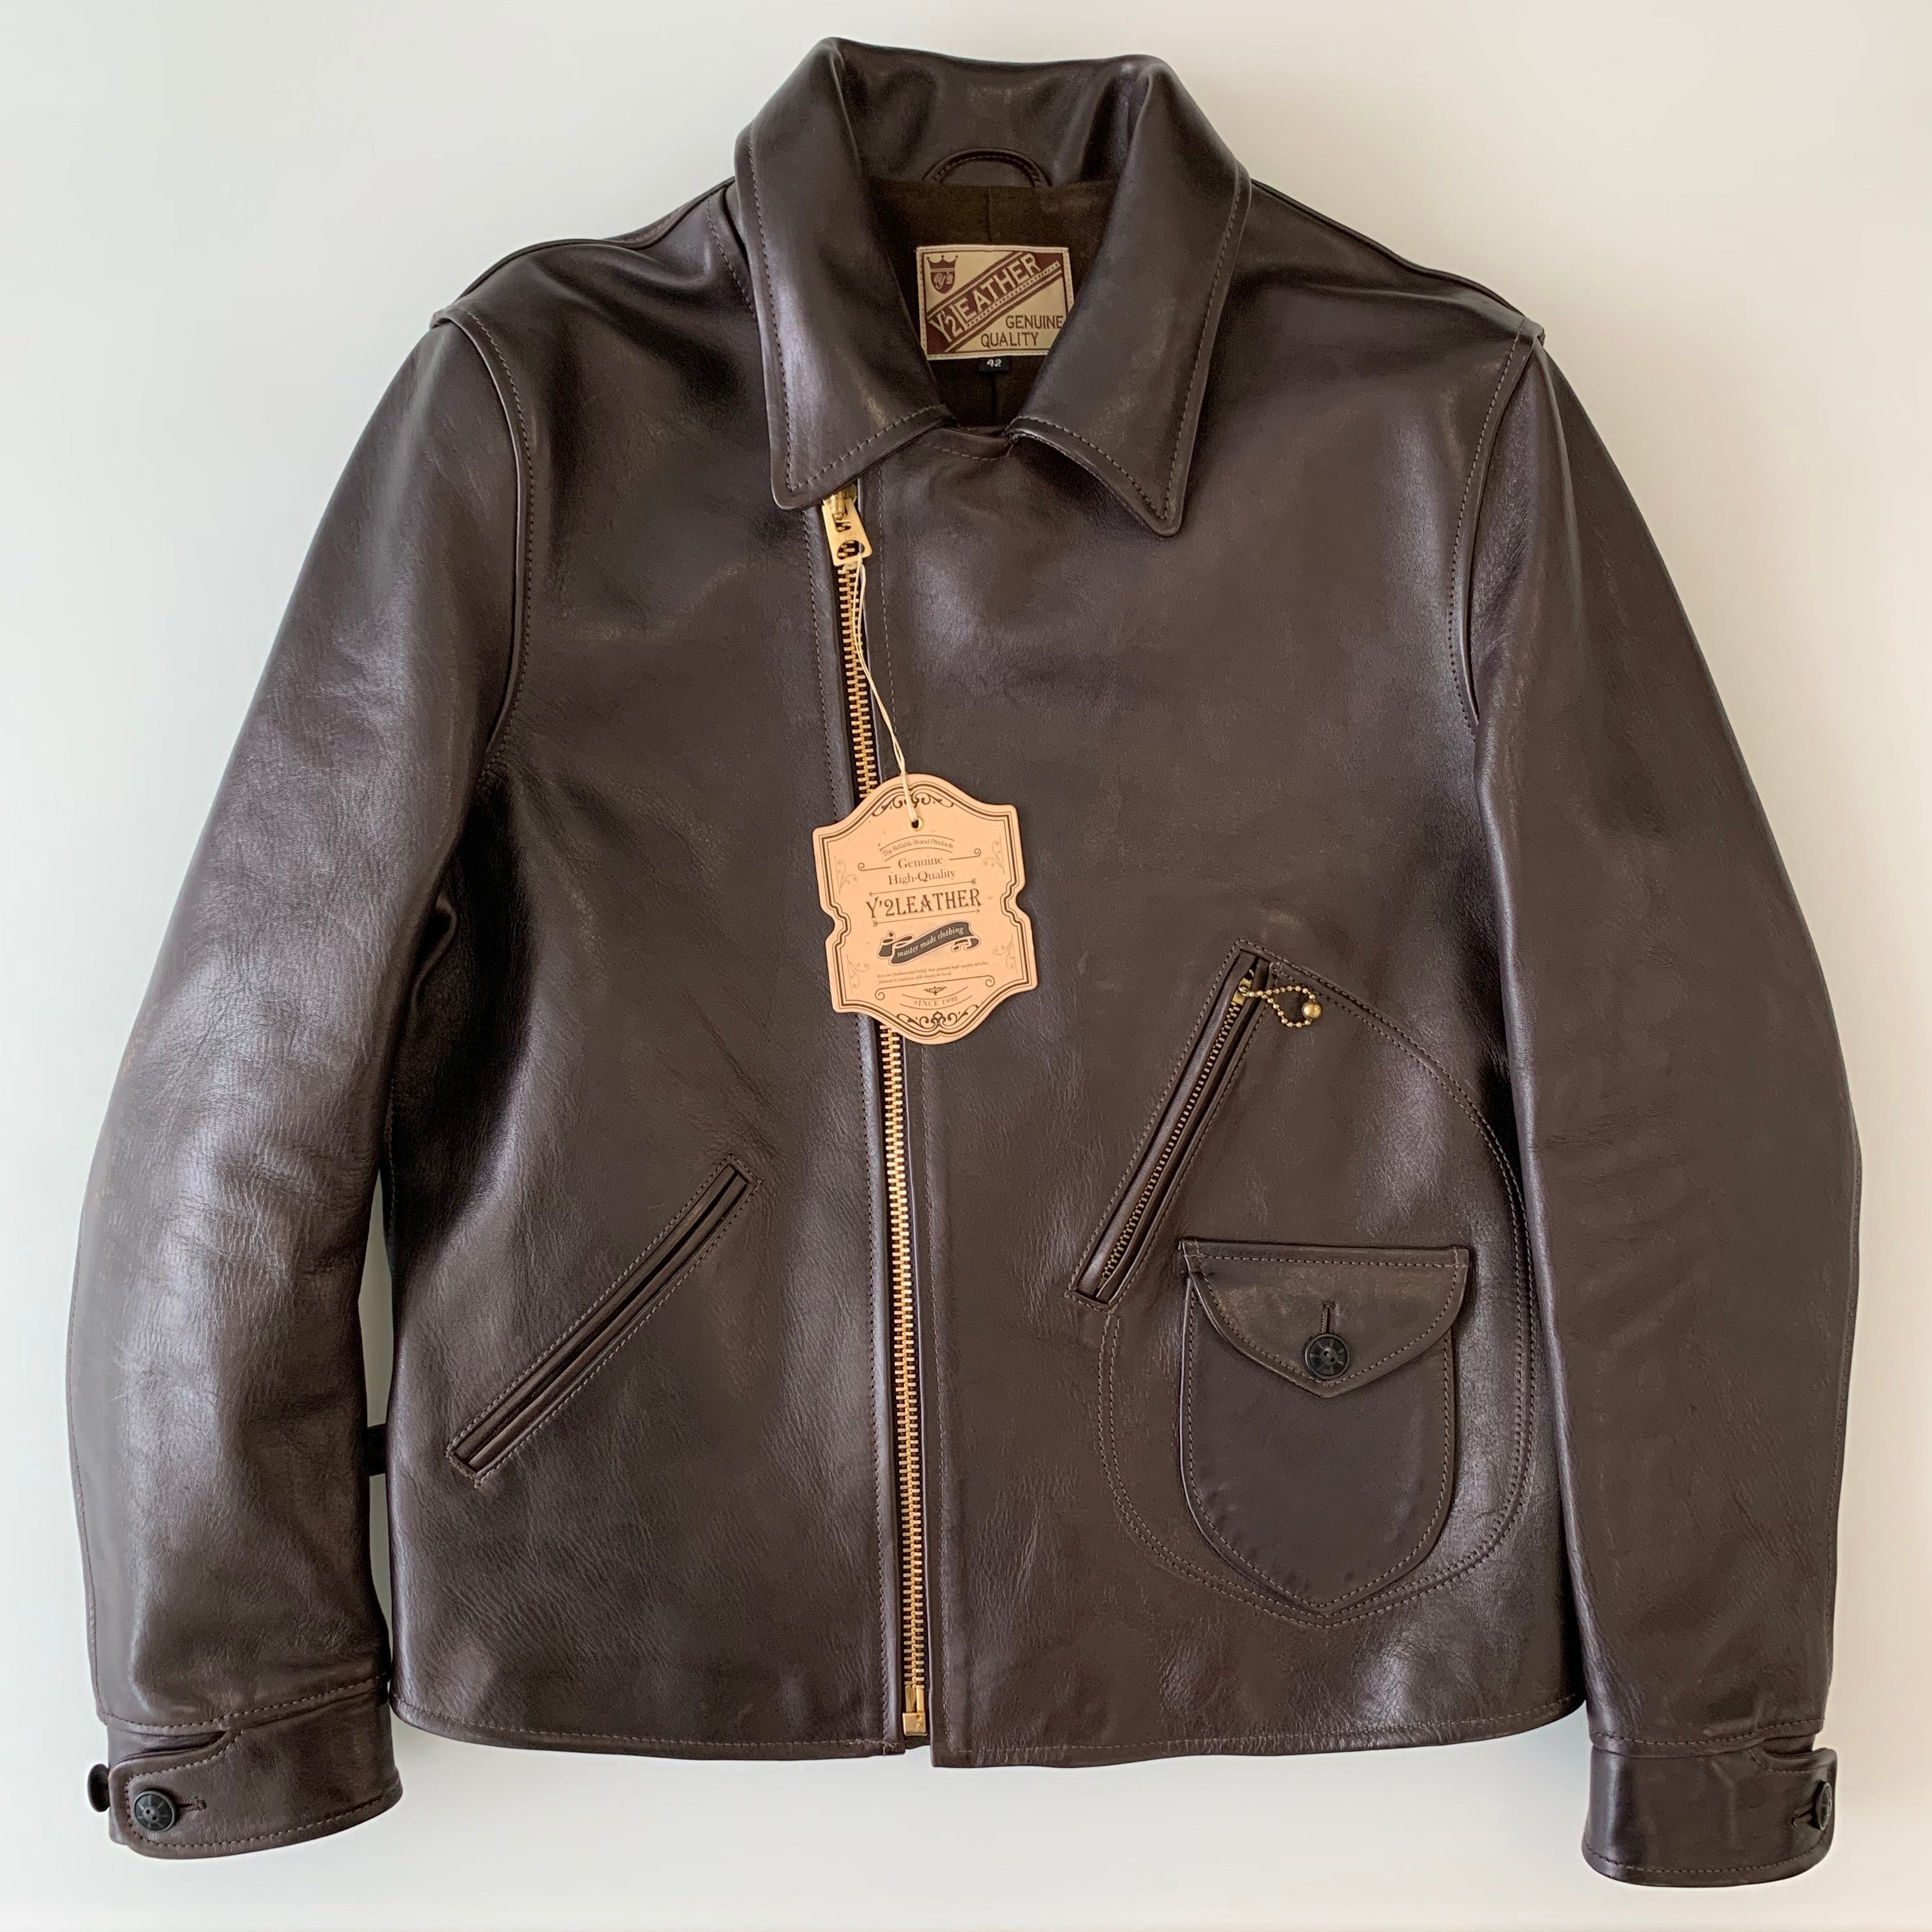 Y'2 LEATHER Hand Dyed Horse Double Riders Jacket in Brown at TEMPO